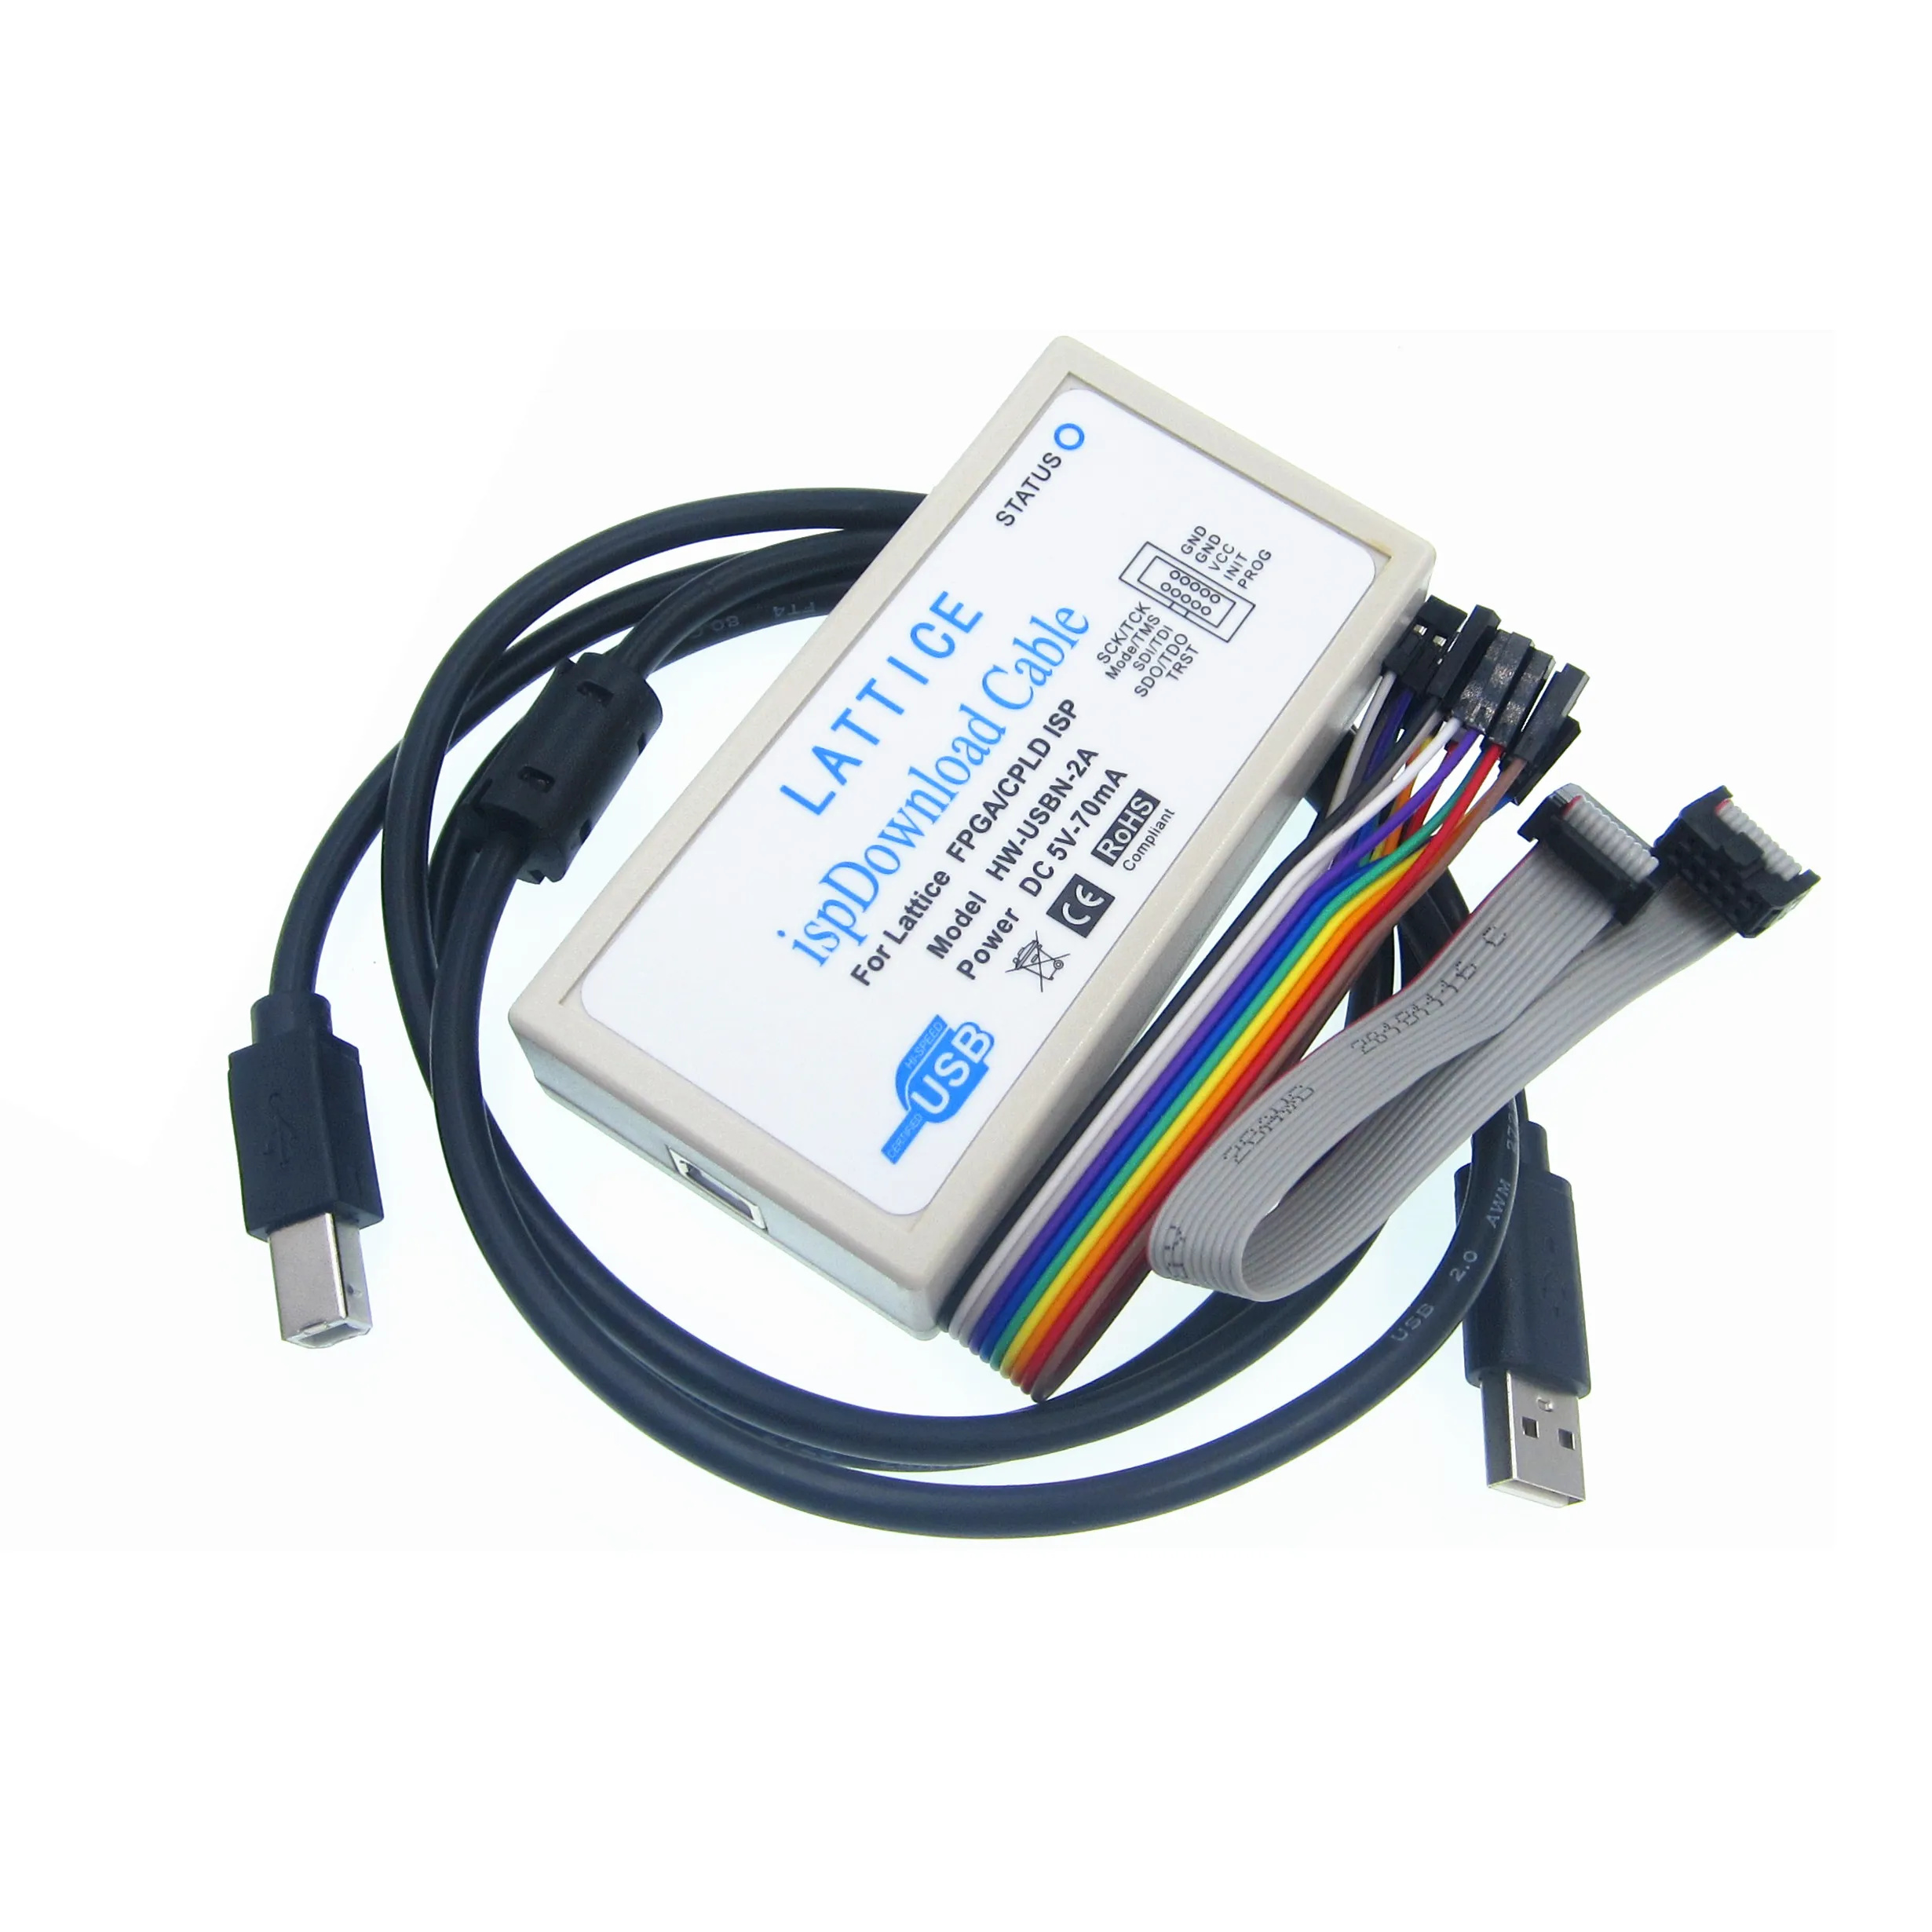 HW-USBN-2A Lattice is Download Cable USB Jtag ISP FPGA CPLD Programmer for Diamond is Lever Win7 WIN8 WIN8.1